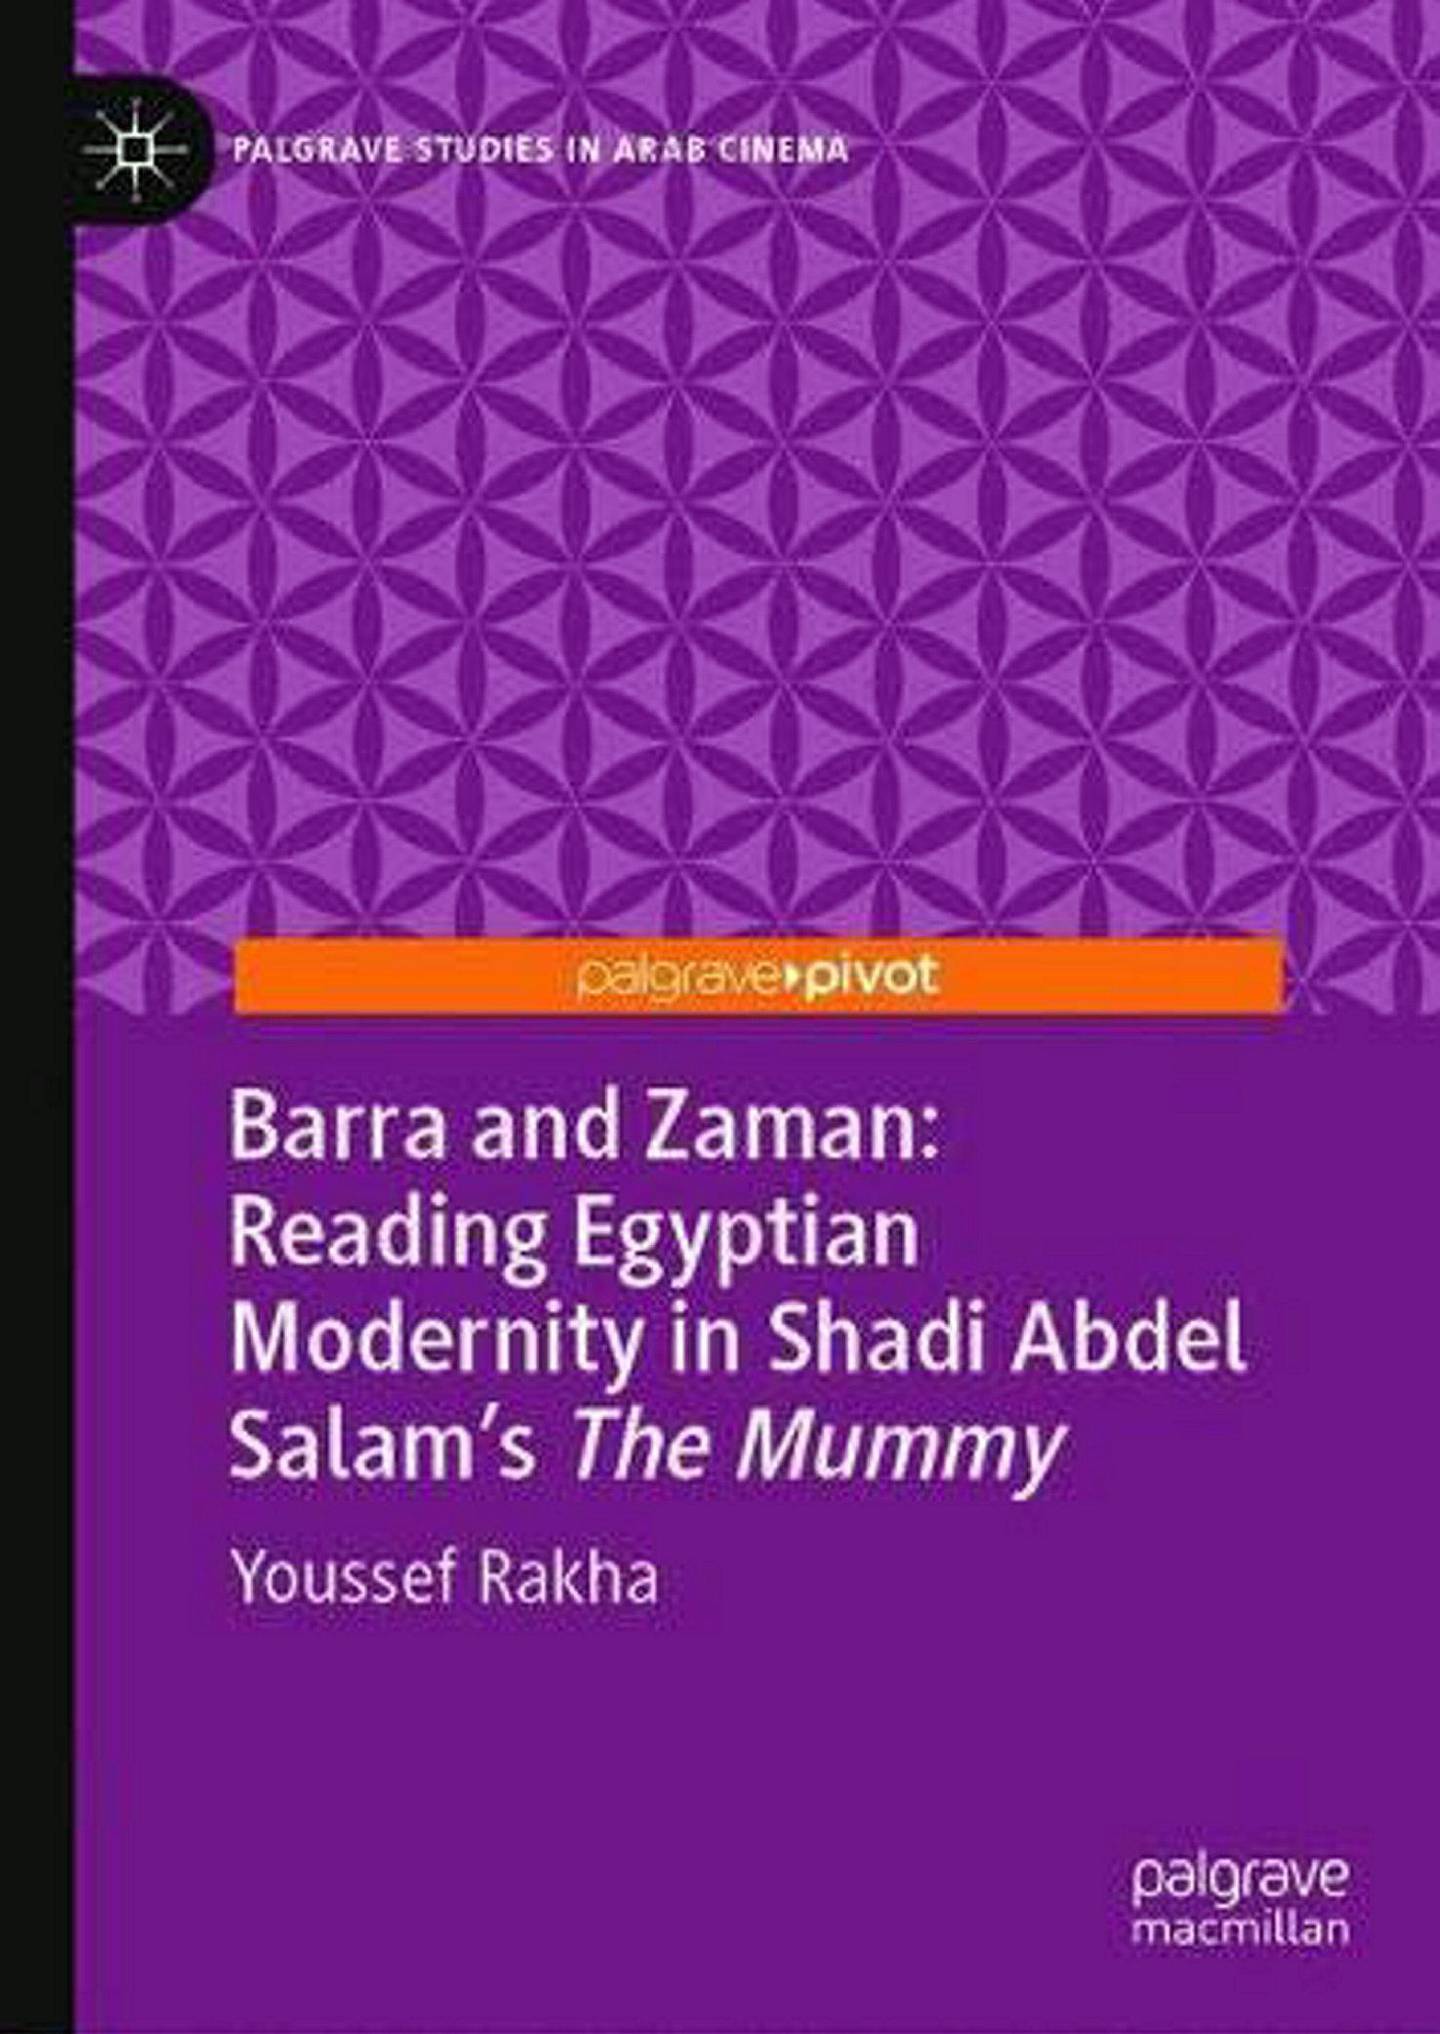 The book cover: Barra and Zaman by Youssef Rakha. 